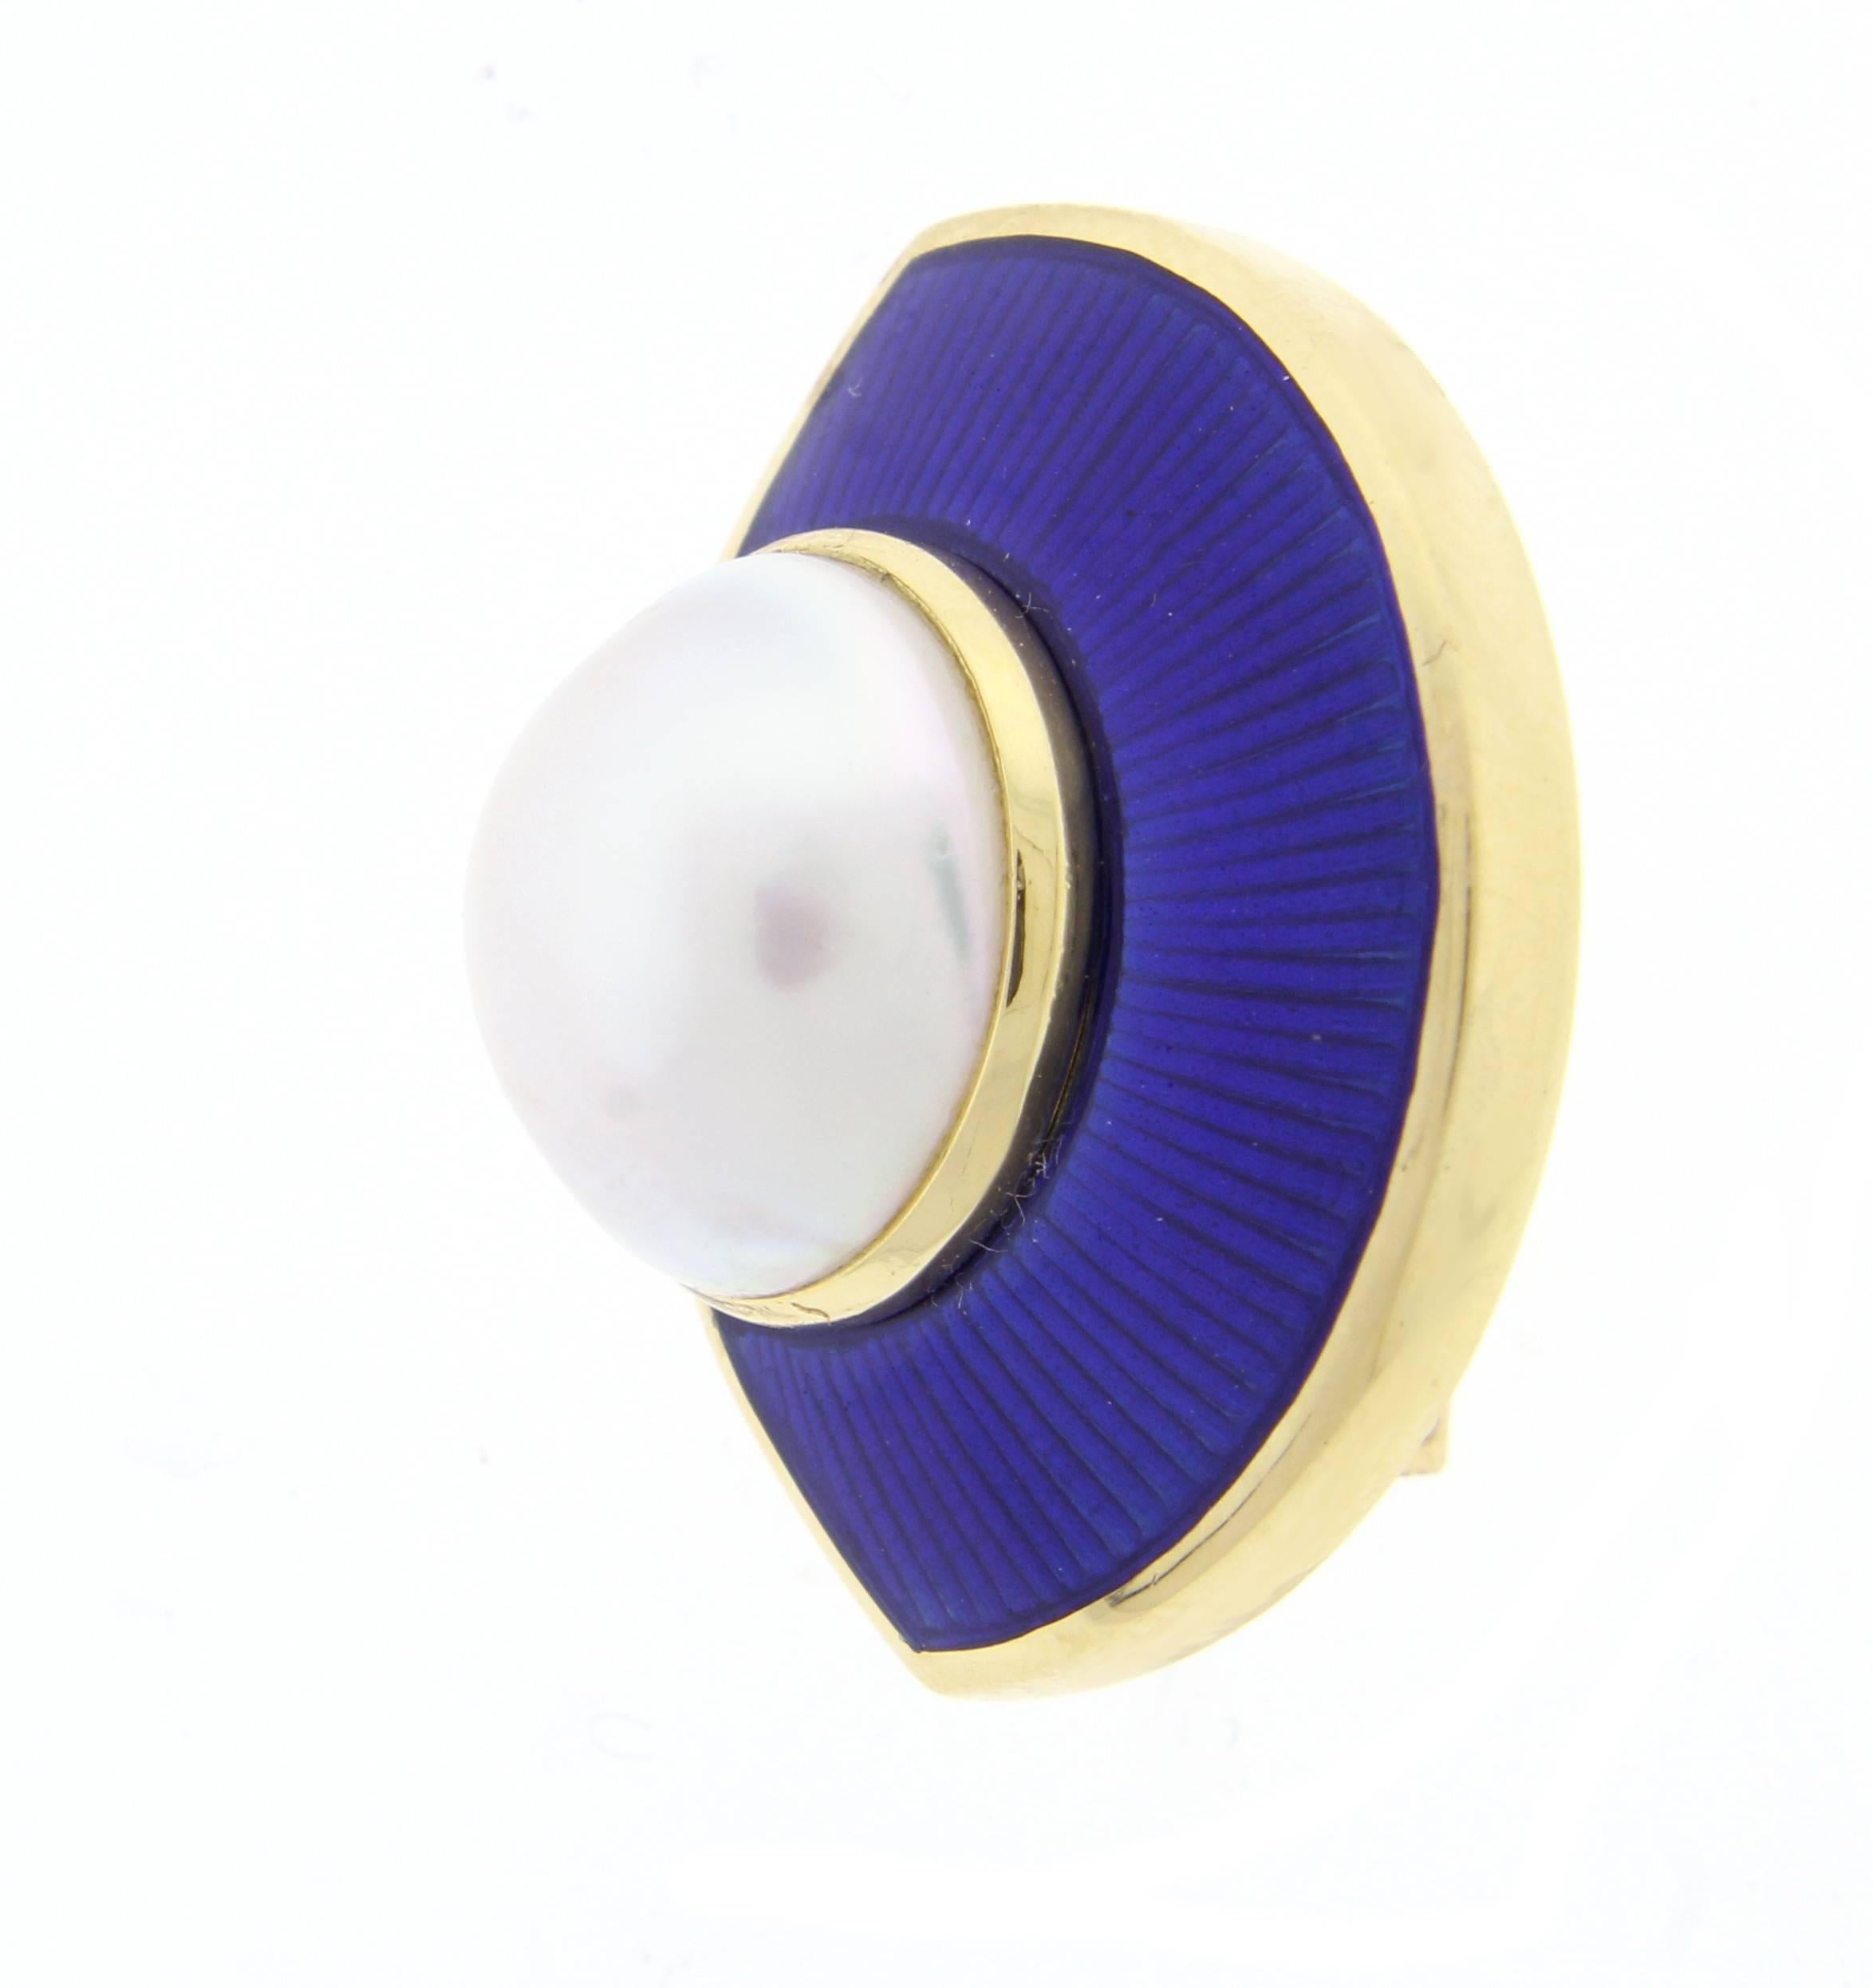  
Leo De Vroomen is world renowned for his vividly colored enameling and stunning designs. These lovely 18 karat gold earrings feature a 13mm mabé pearl. The pearl is partially framed by a fan of vivid blue French enamel.  The earrings feature